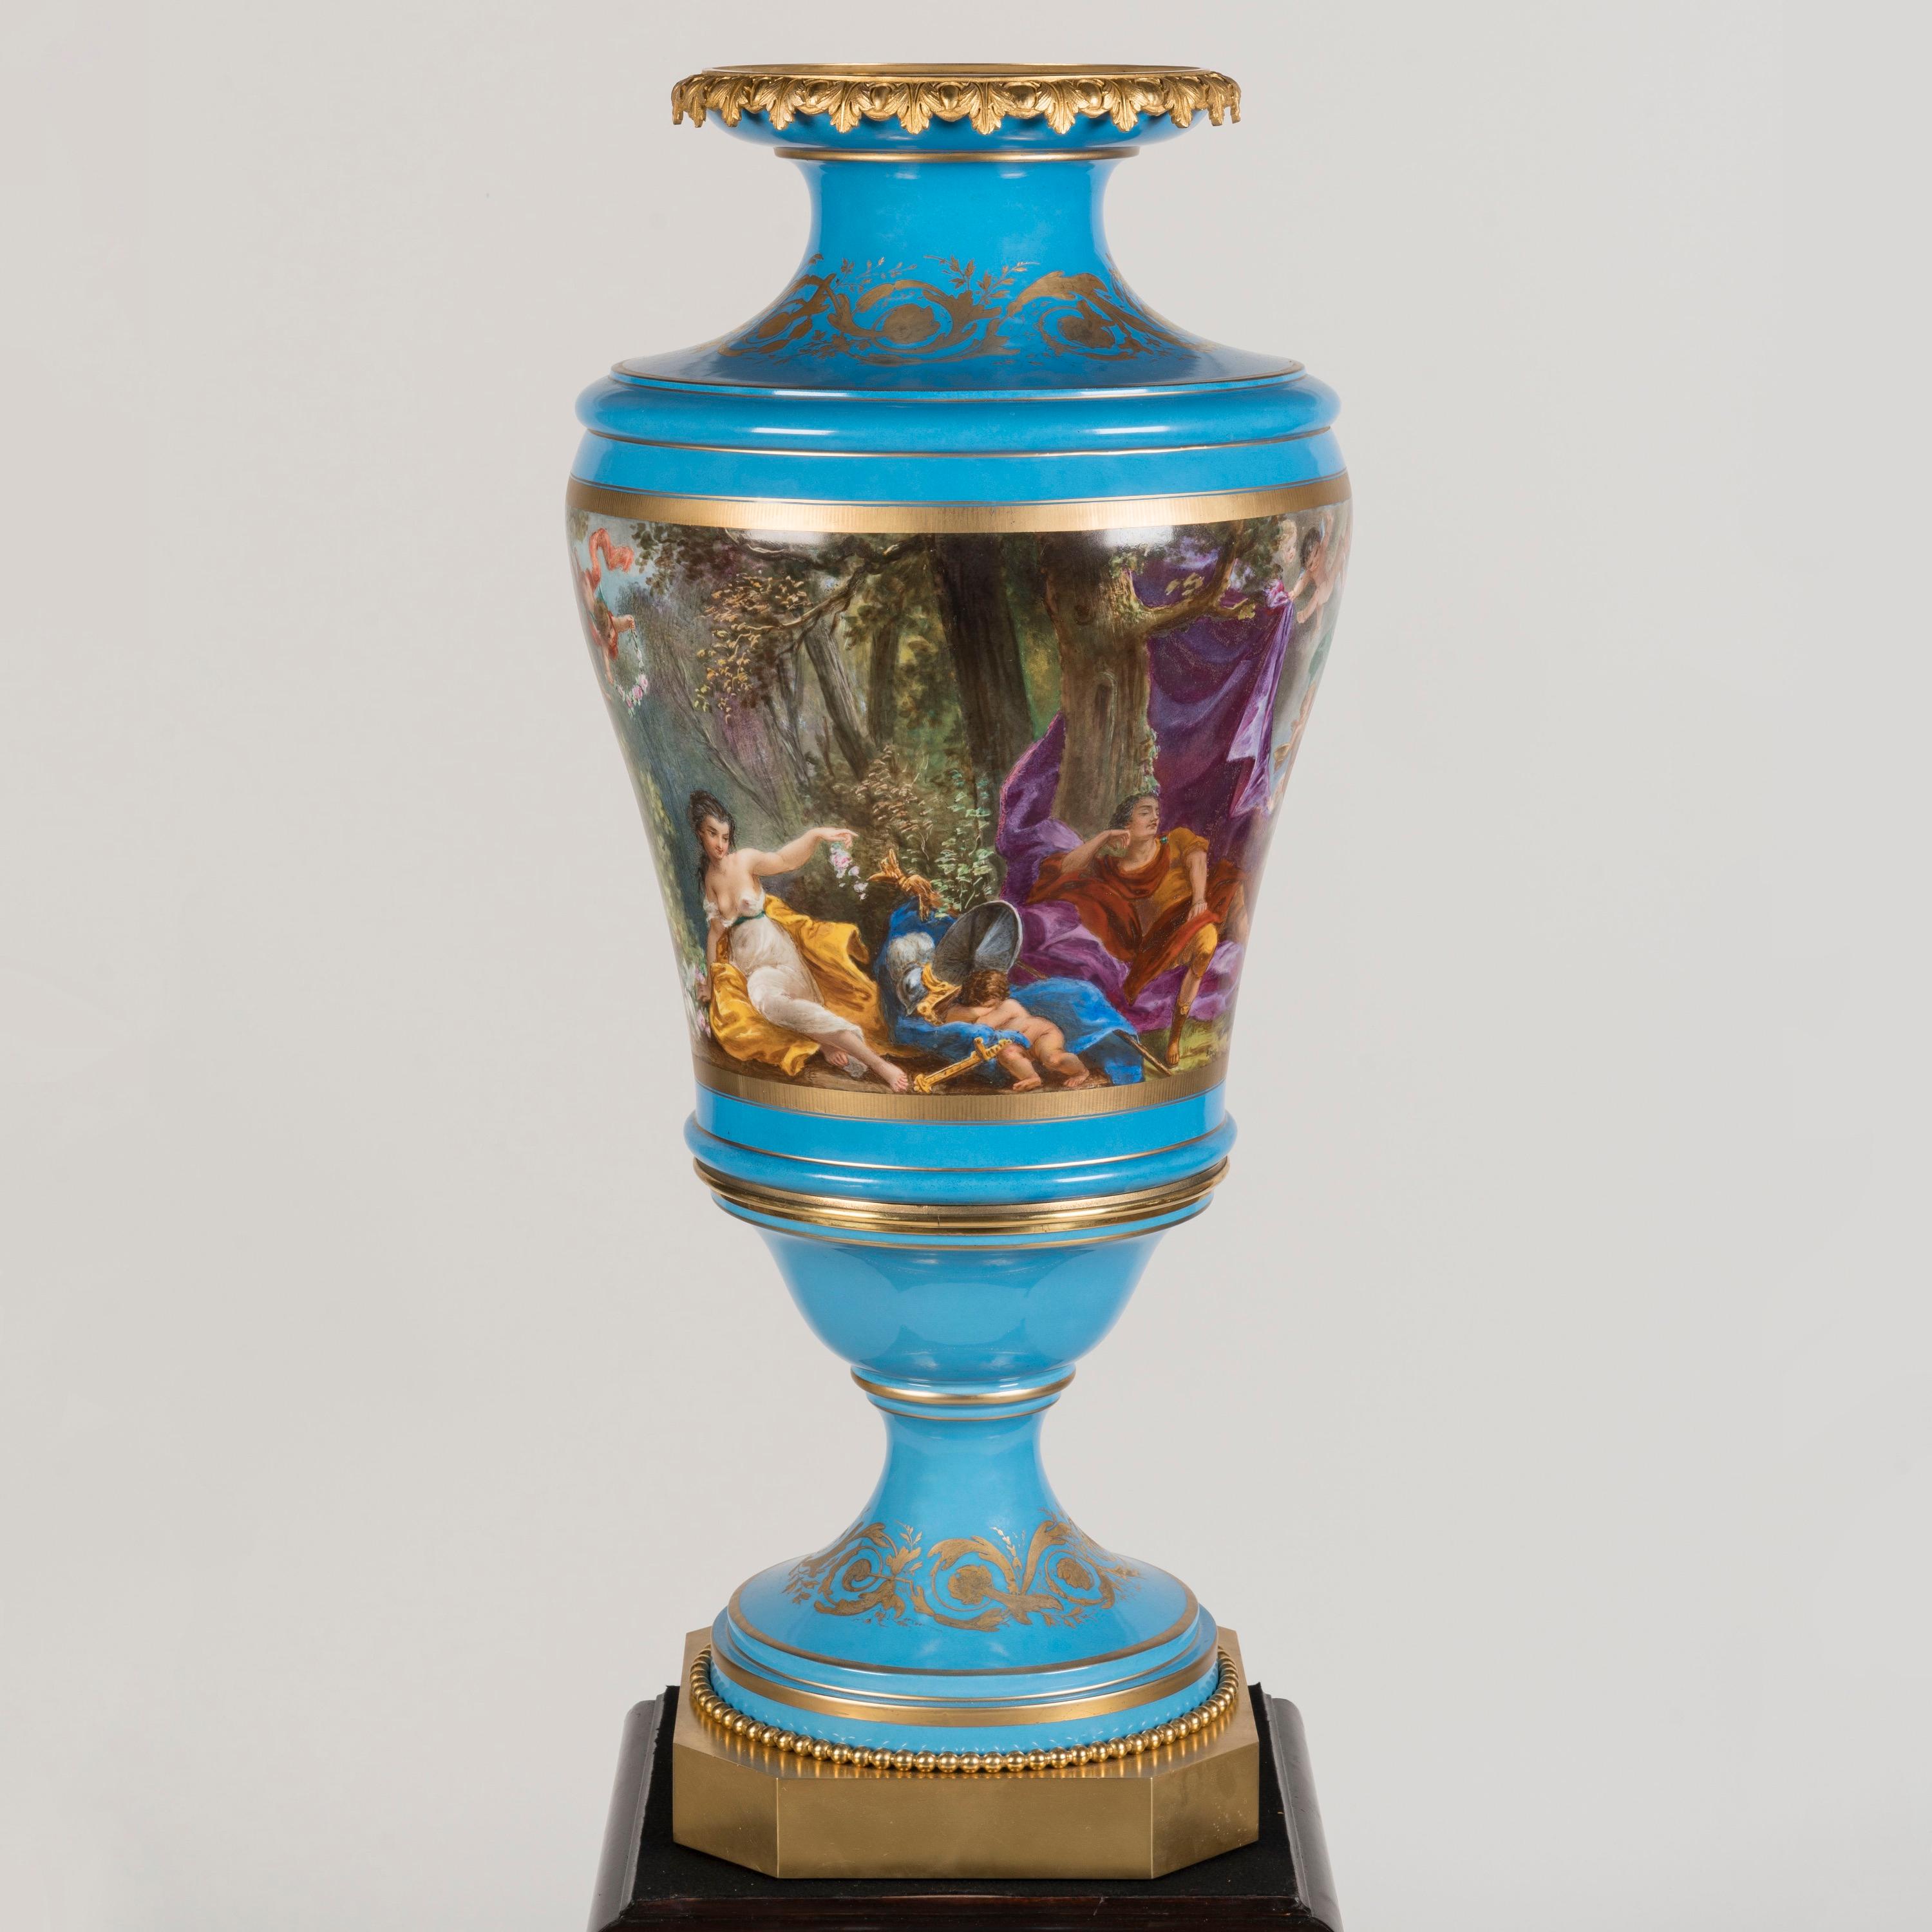 A Large & Impressive 'Sèvres' Style
Porcelain Vase

Standing at three feet tall, the baluster-shaped porcelain vase raised on an ormolu octagonal base with pearl band, and an ormolu stiff-leaf collar at the lip. The decoration scheme carried out